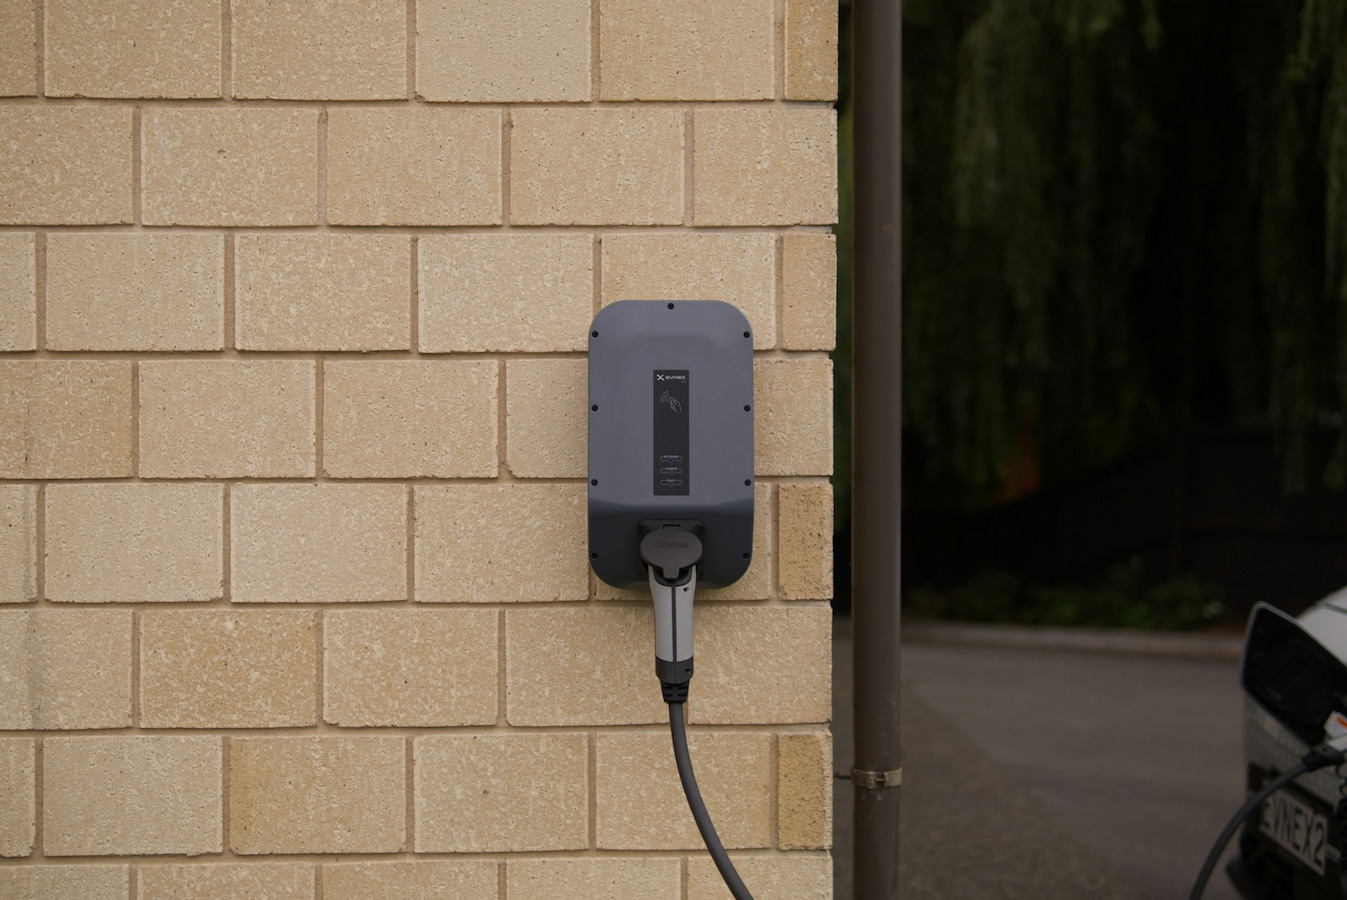 A level 2 EV charger installed outside of the house near the driveway